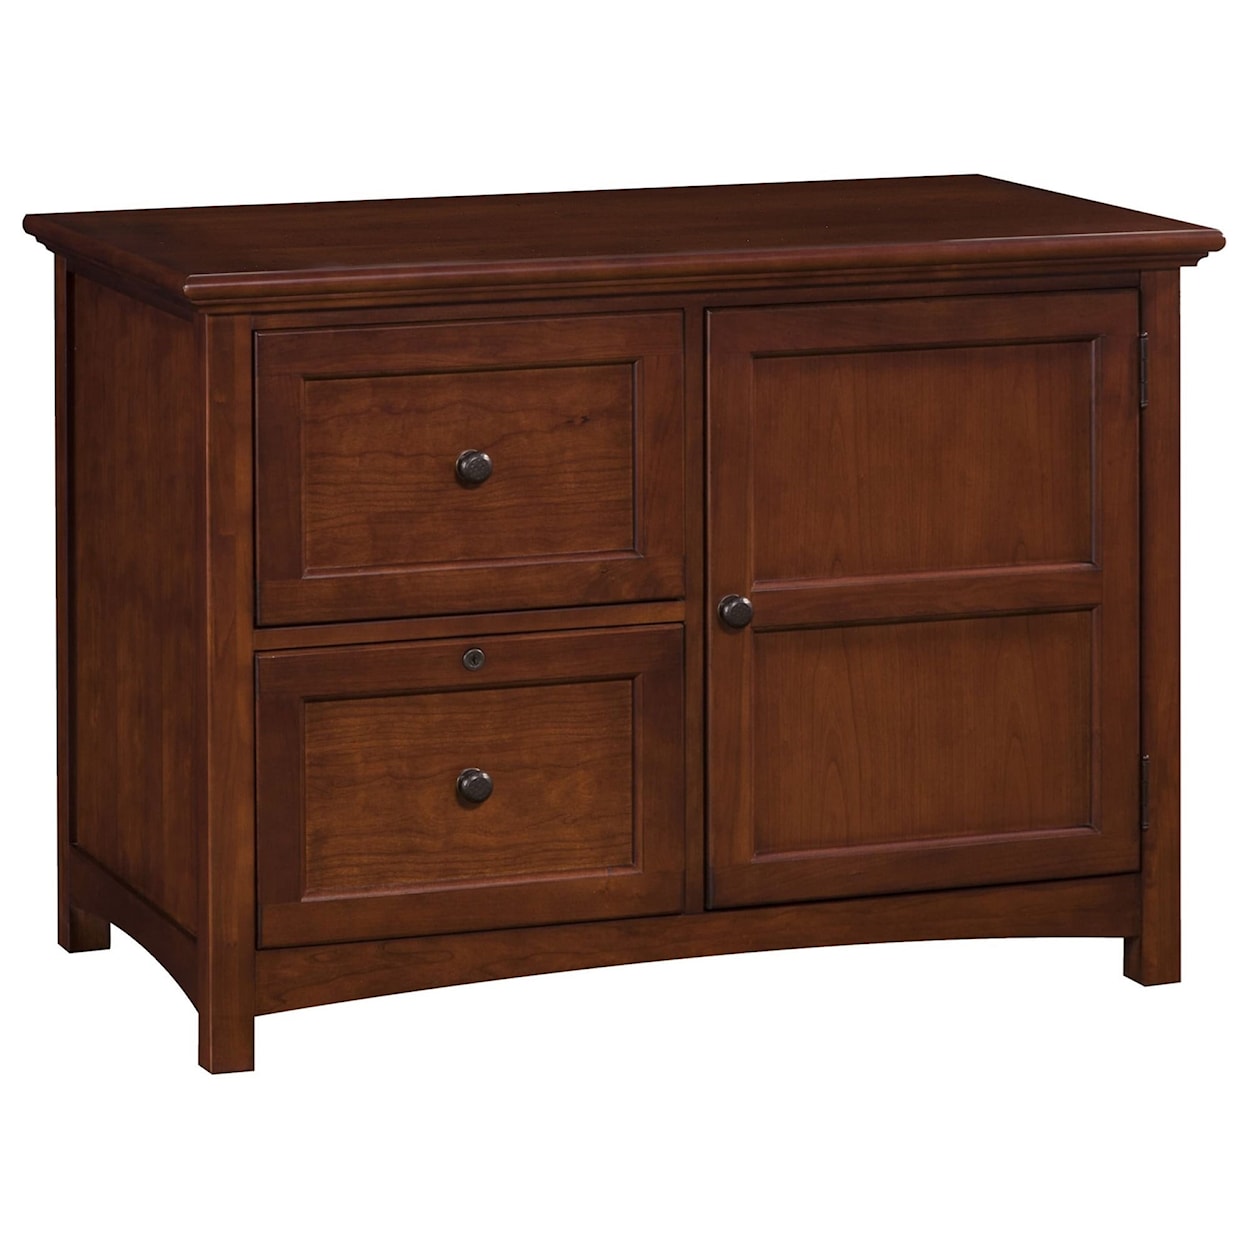 Winners Only Flagstaff 2-Drawer Lateral File Cabinet